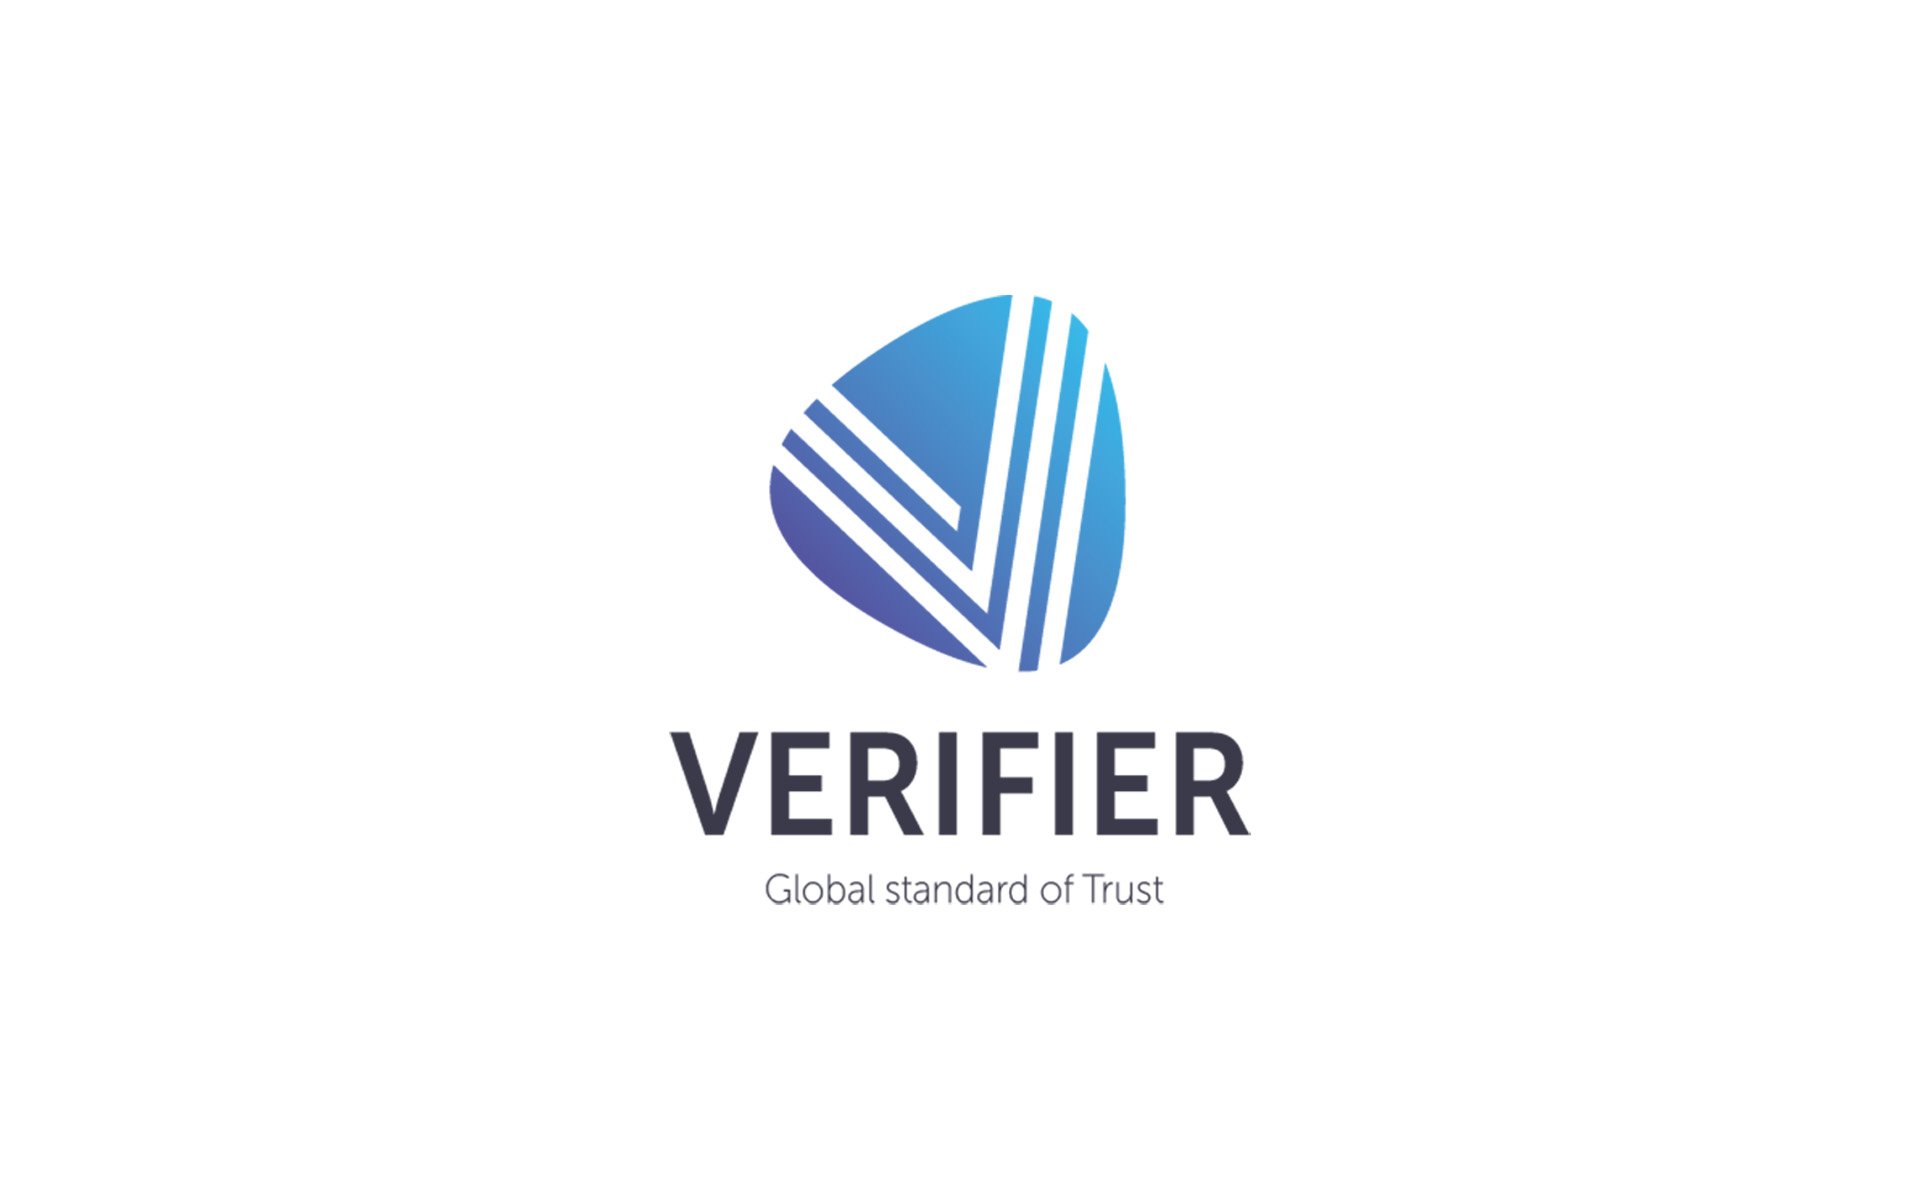 Verifier Will Use Blockchain to Check and Confirm Any Data Without Your Involvement